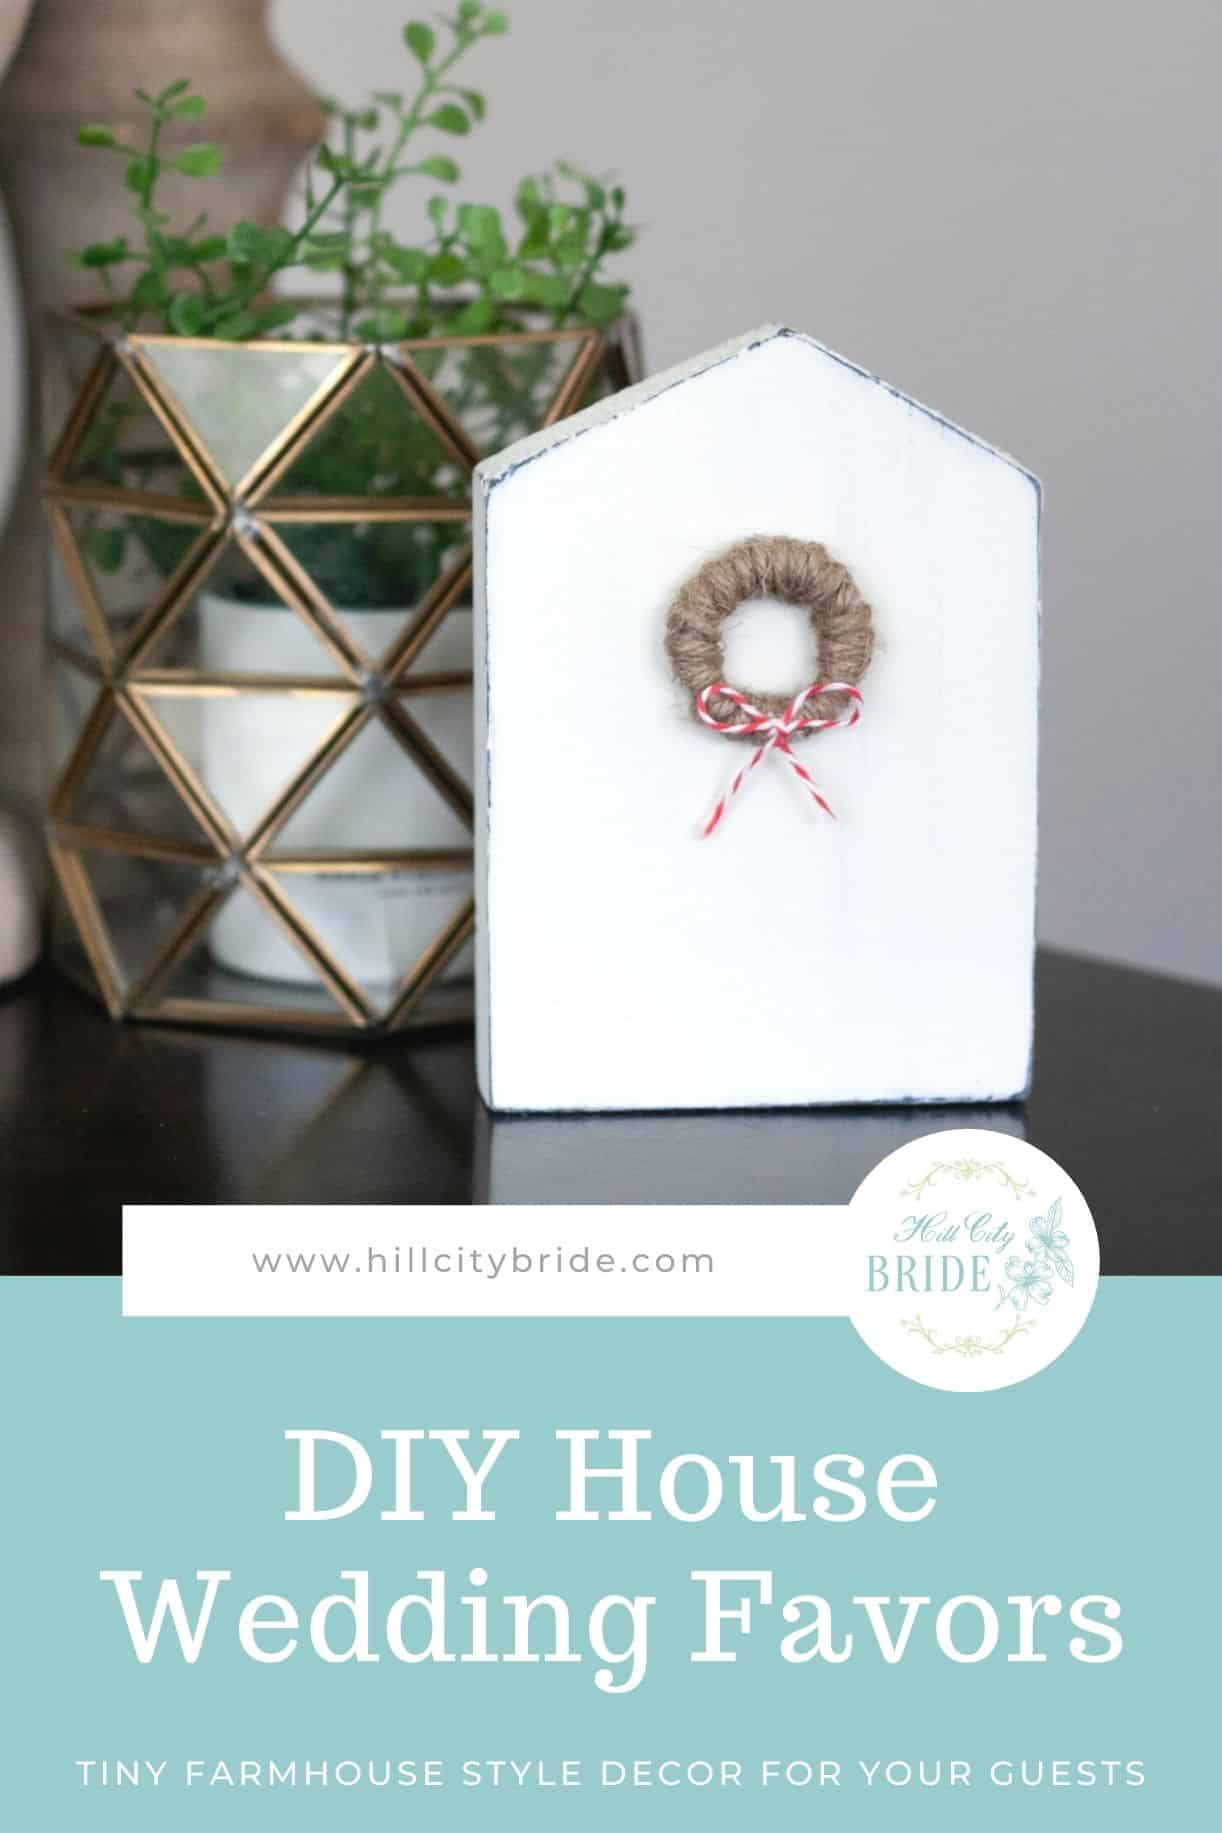 DIY Tiny Home for Your Wedding Favors